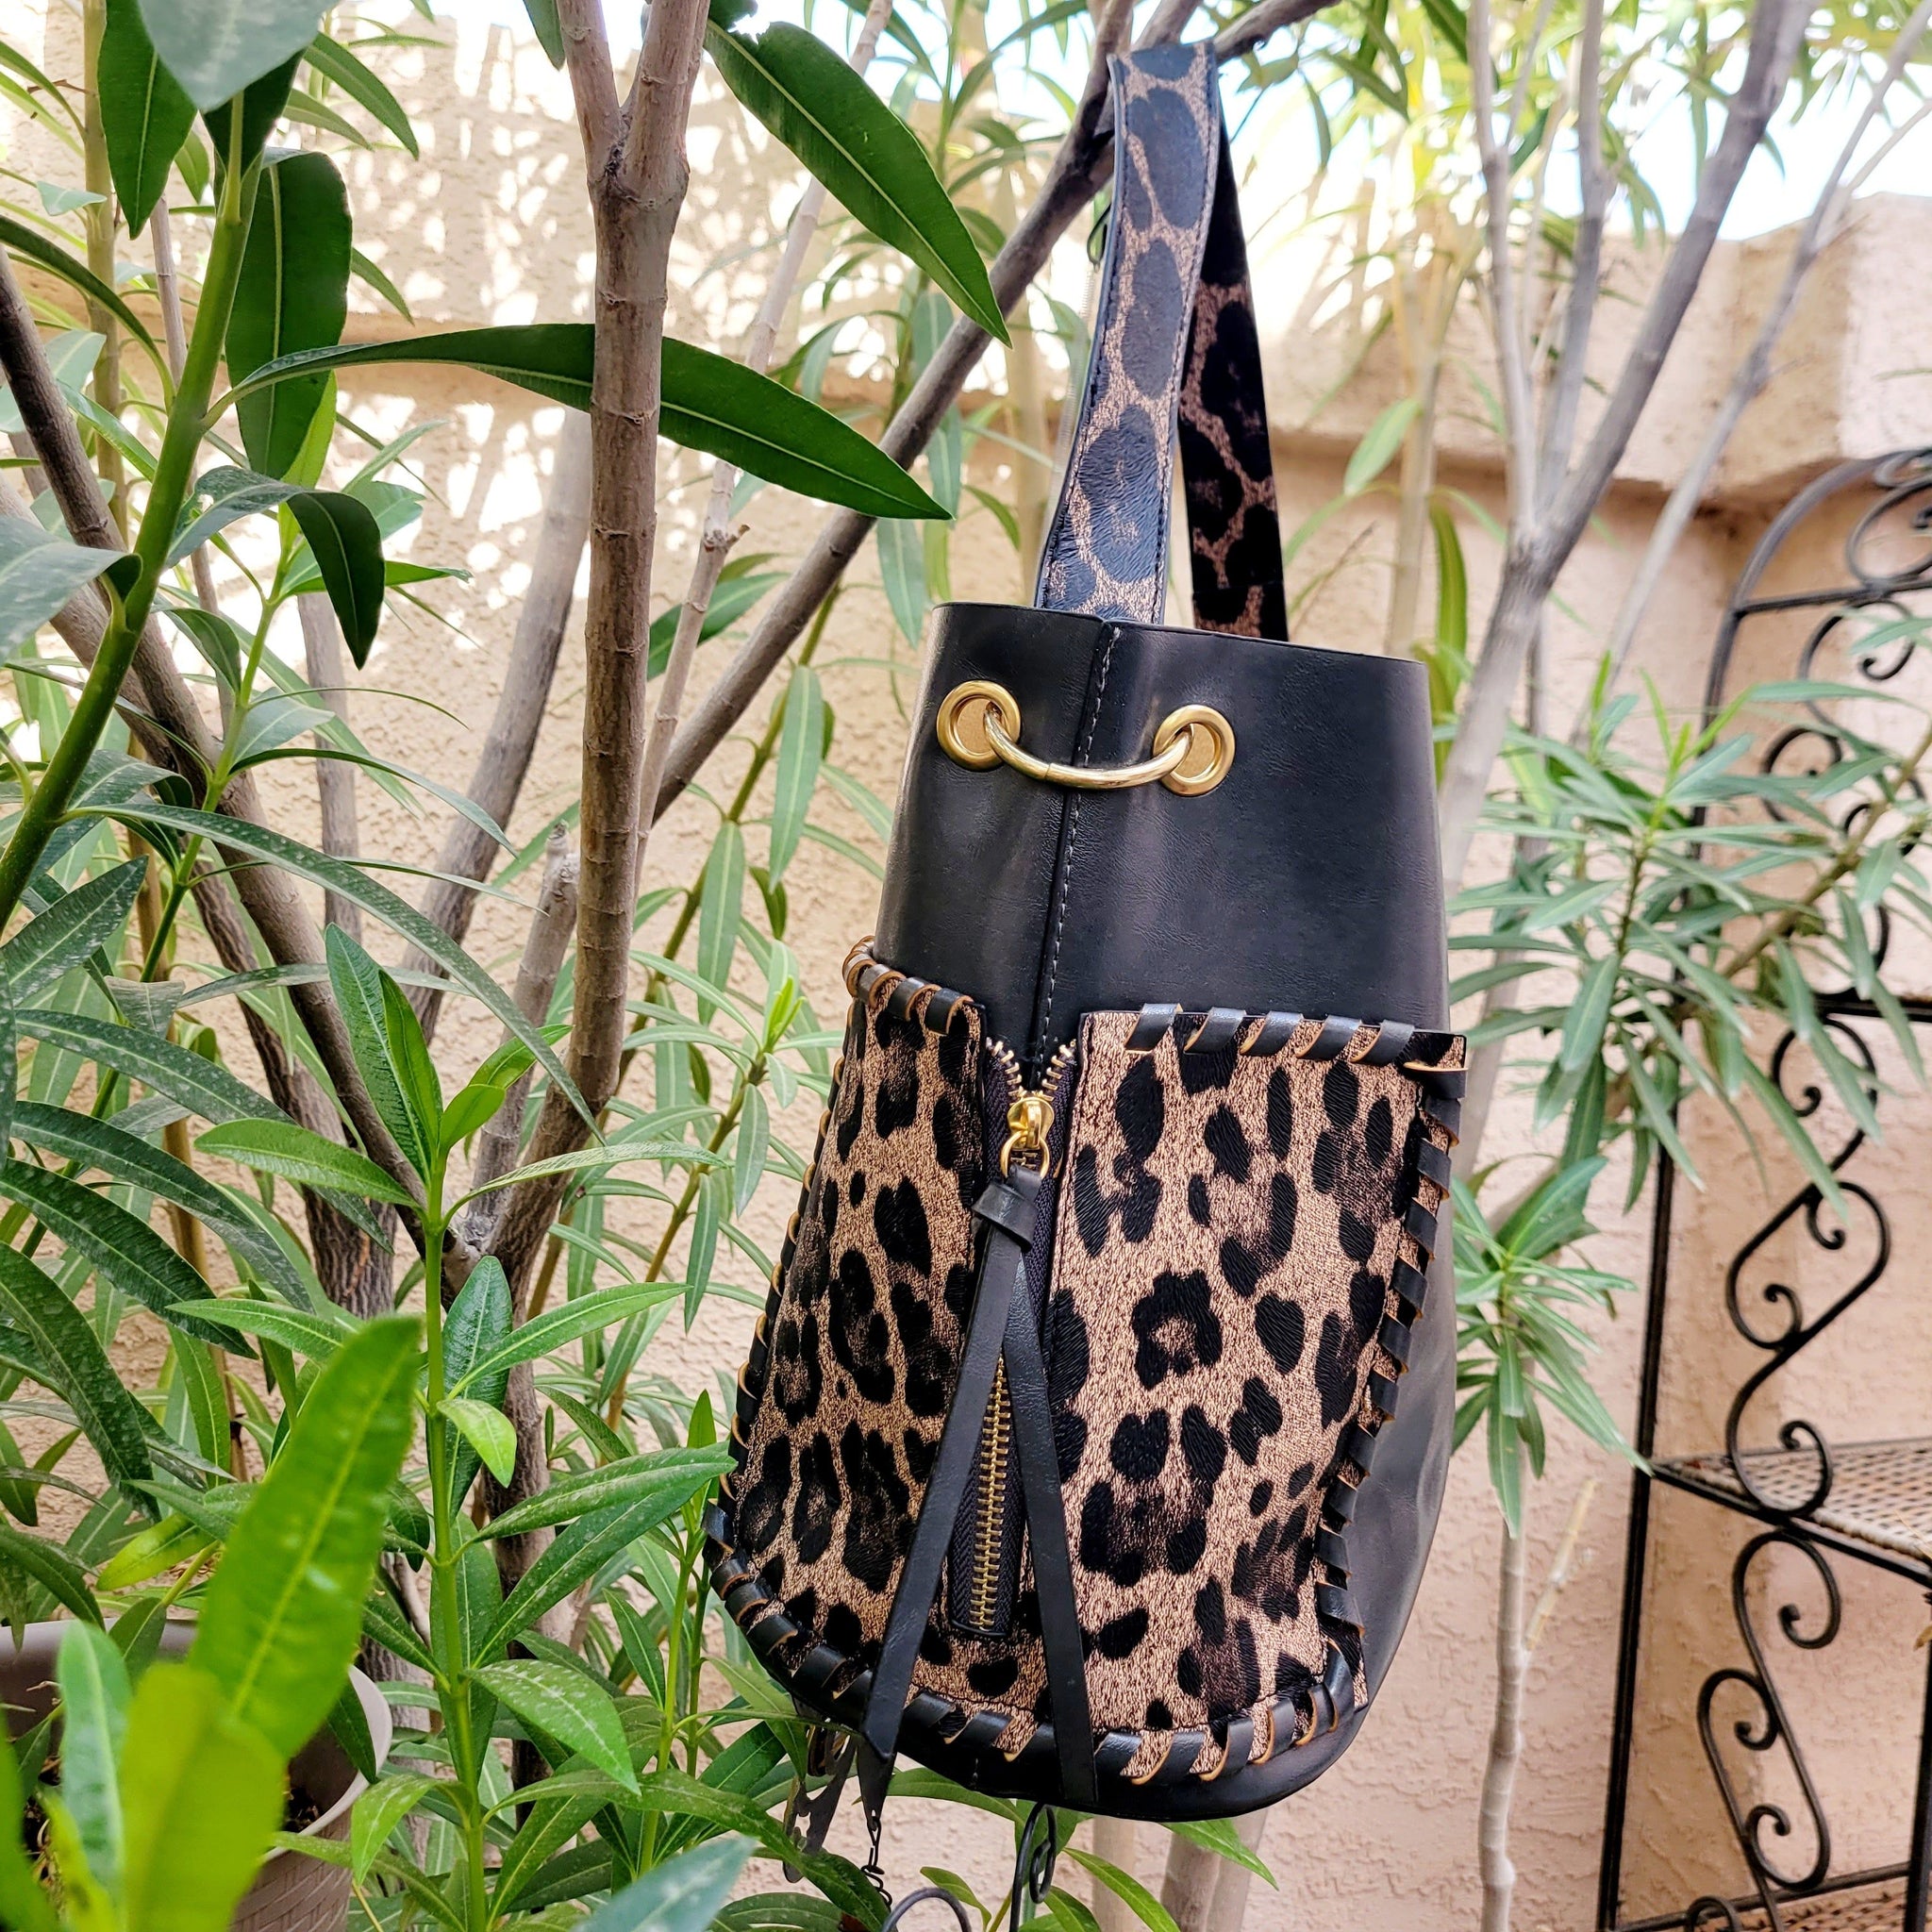 Luxe North South Bag: Grey Leopard